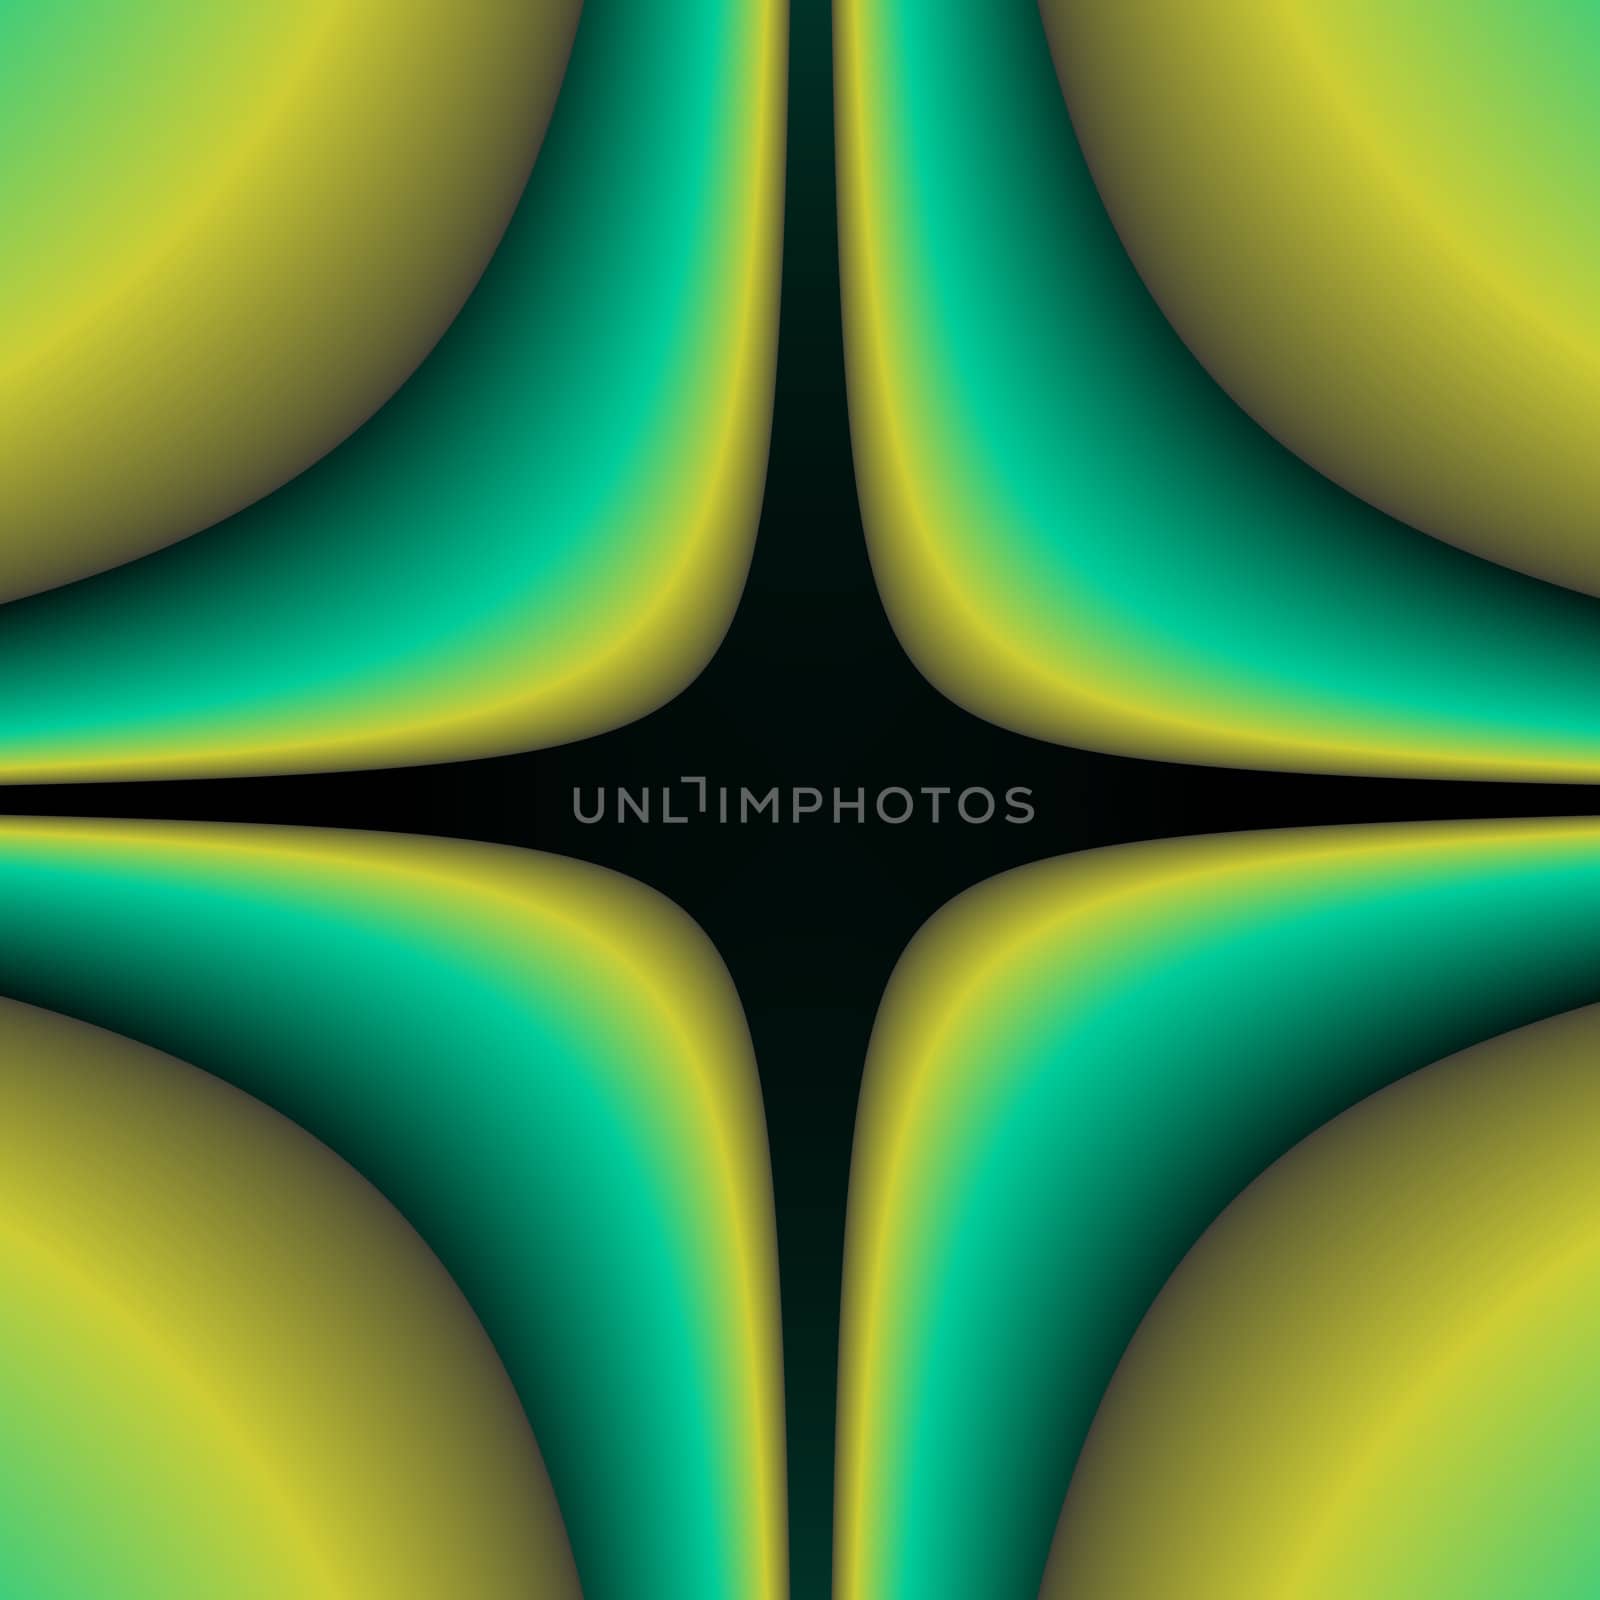 An abstract fractal done in layers of yellow and green with a black center that peers through to another dimensio.